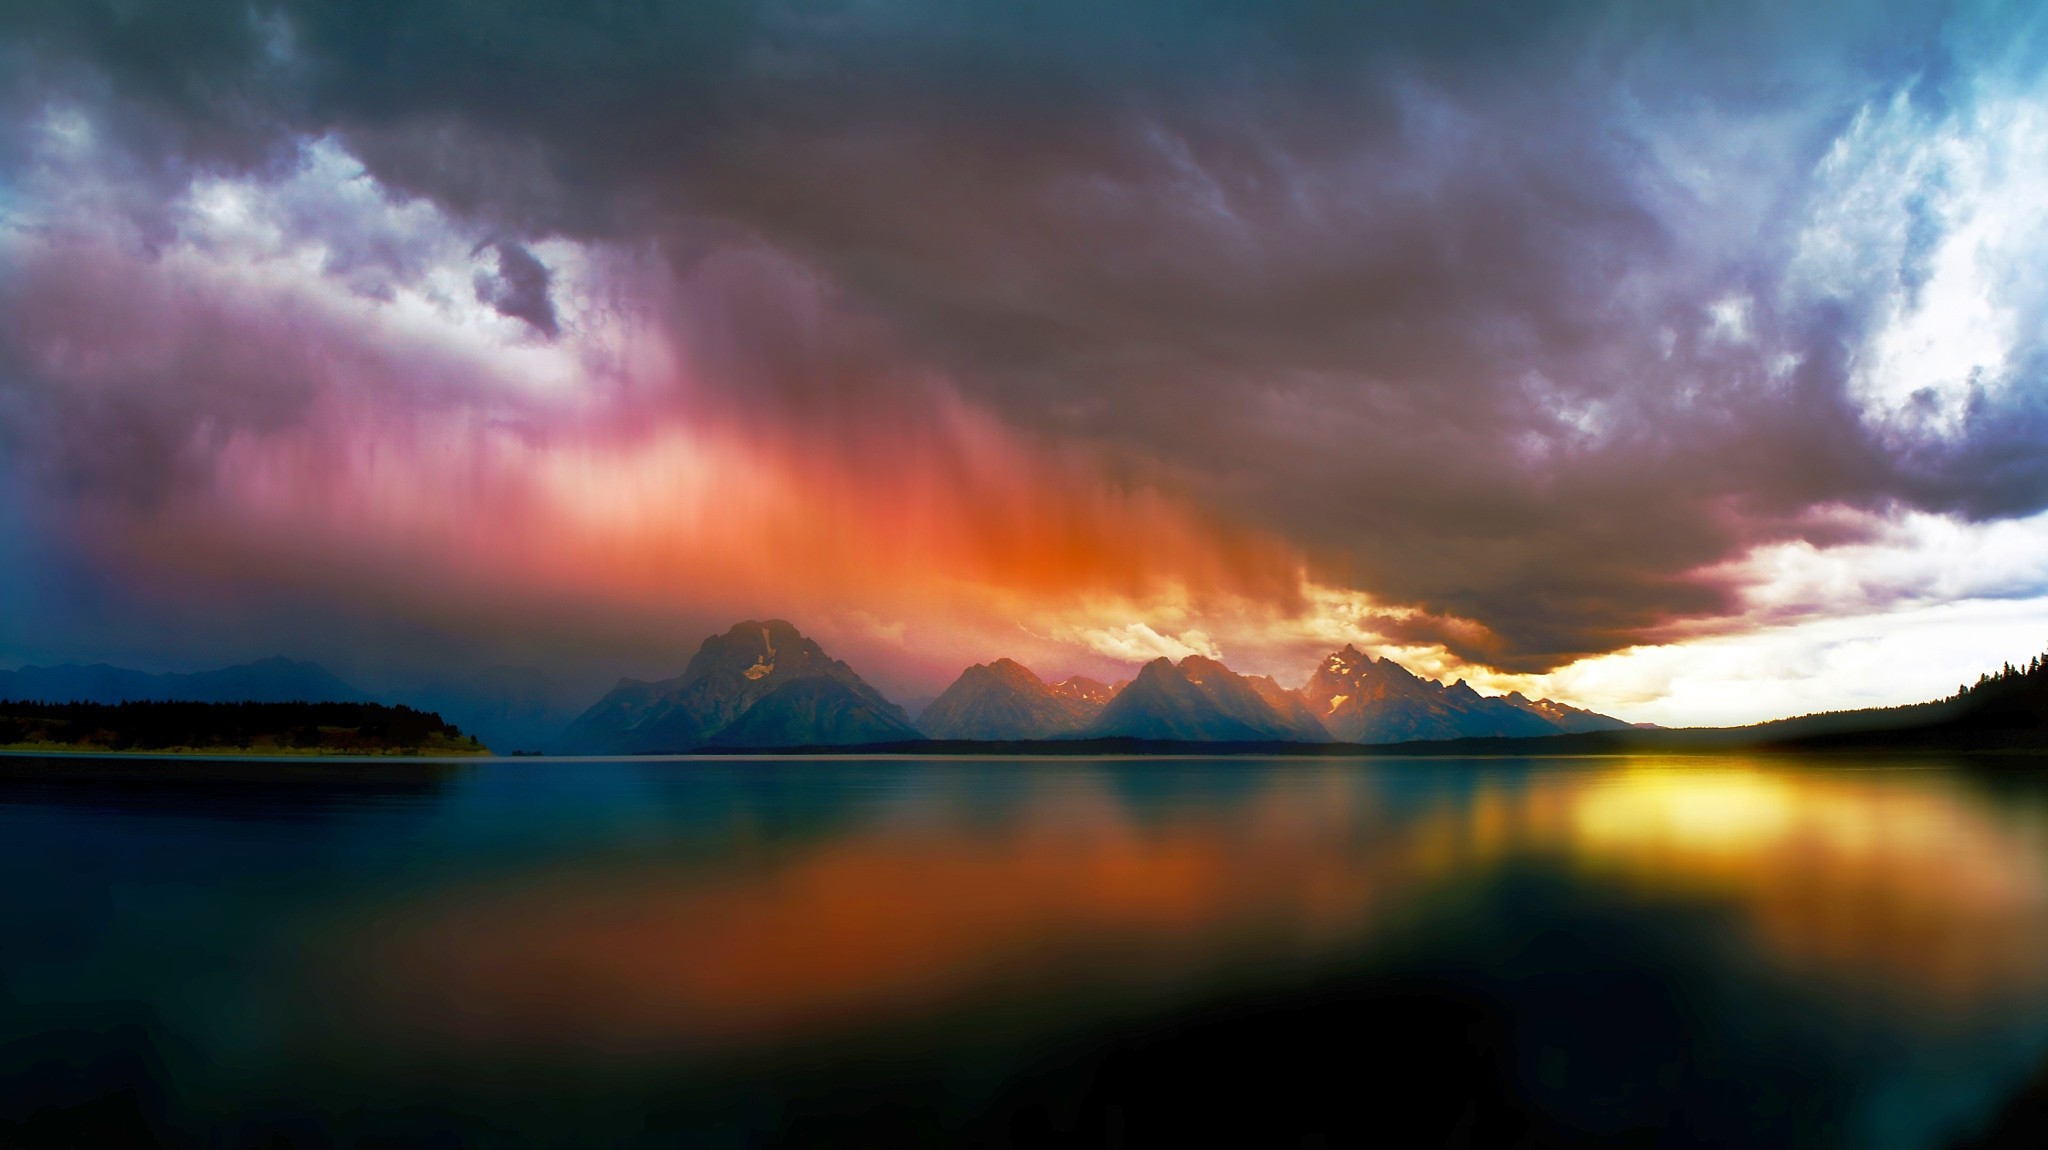 Lake Mountain Storm Clouds Nature Landscape Water Rain Colorful